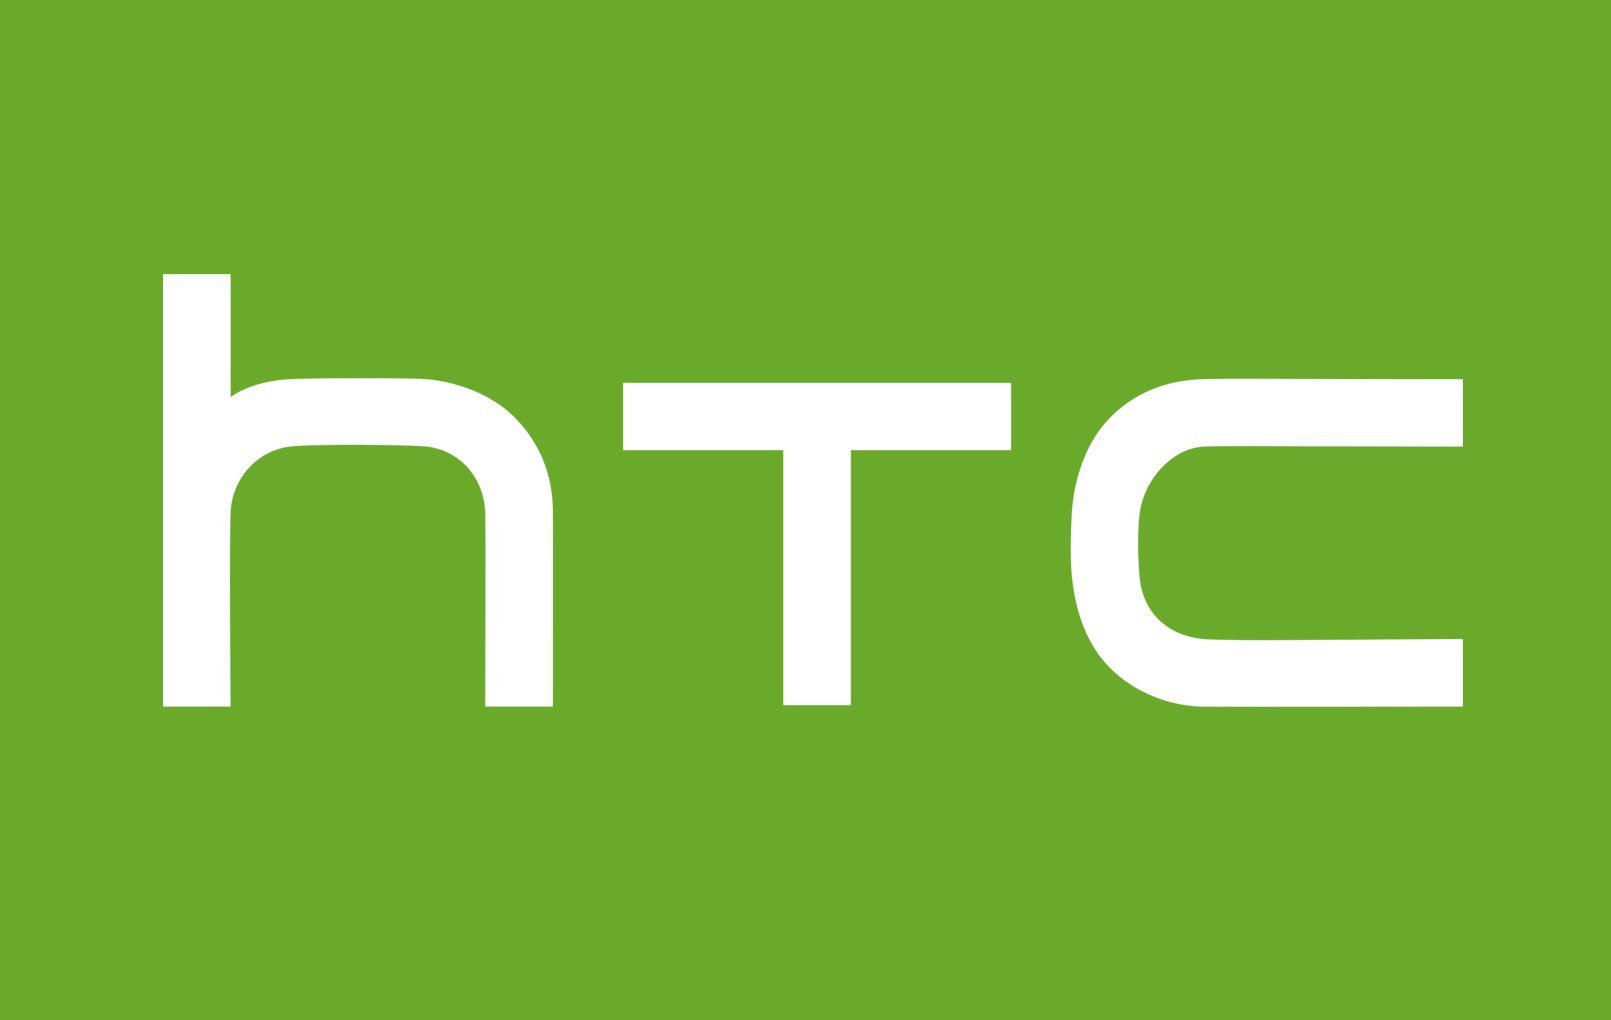 How to Root HTC Desire 526 with Magisk without TWRP